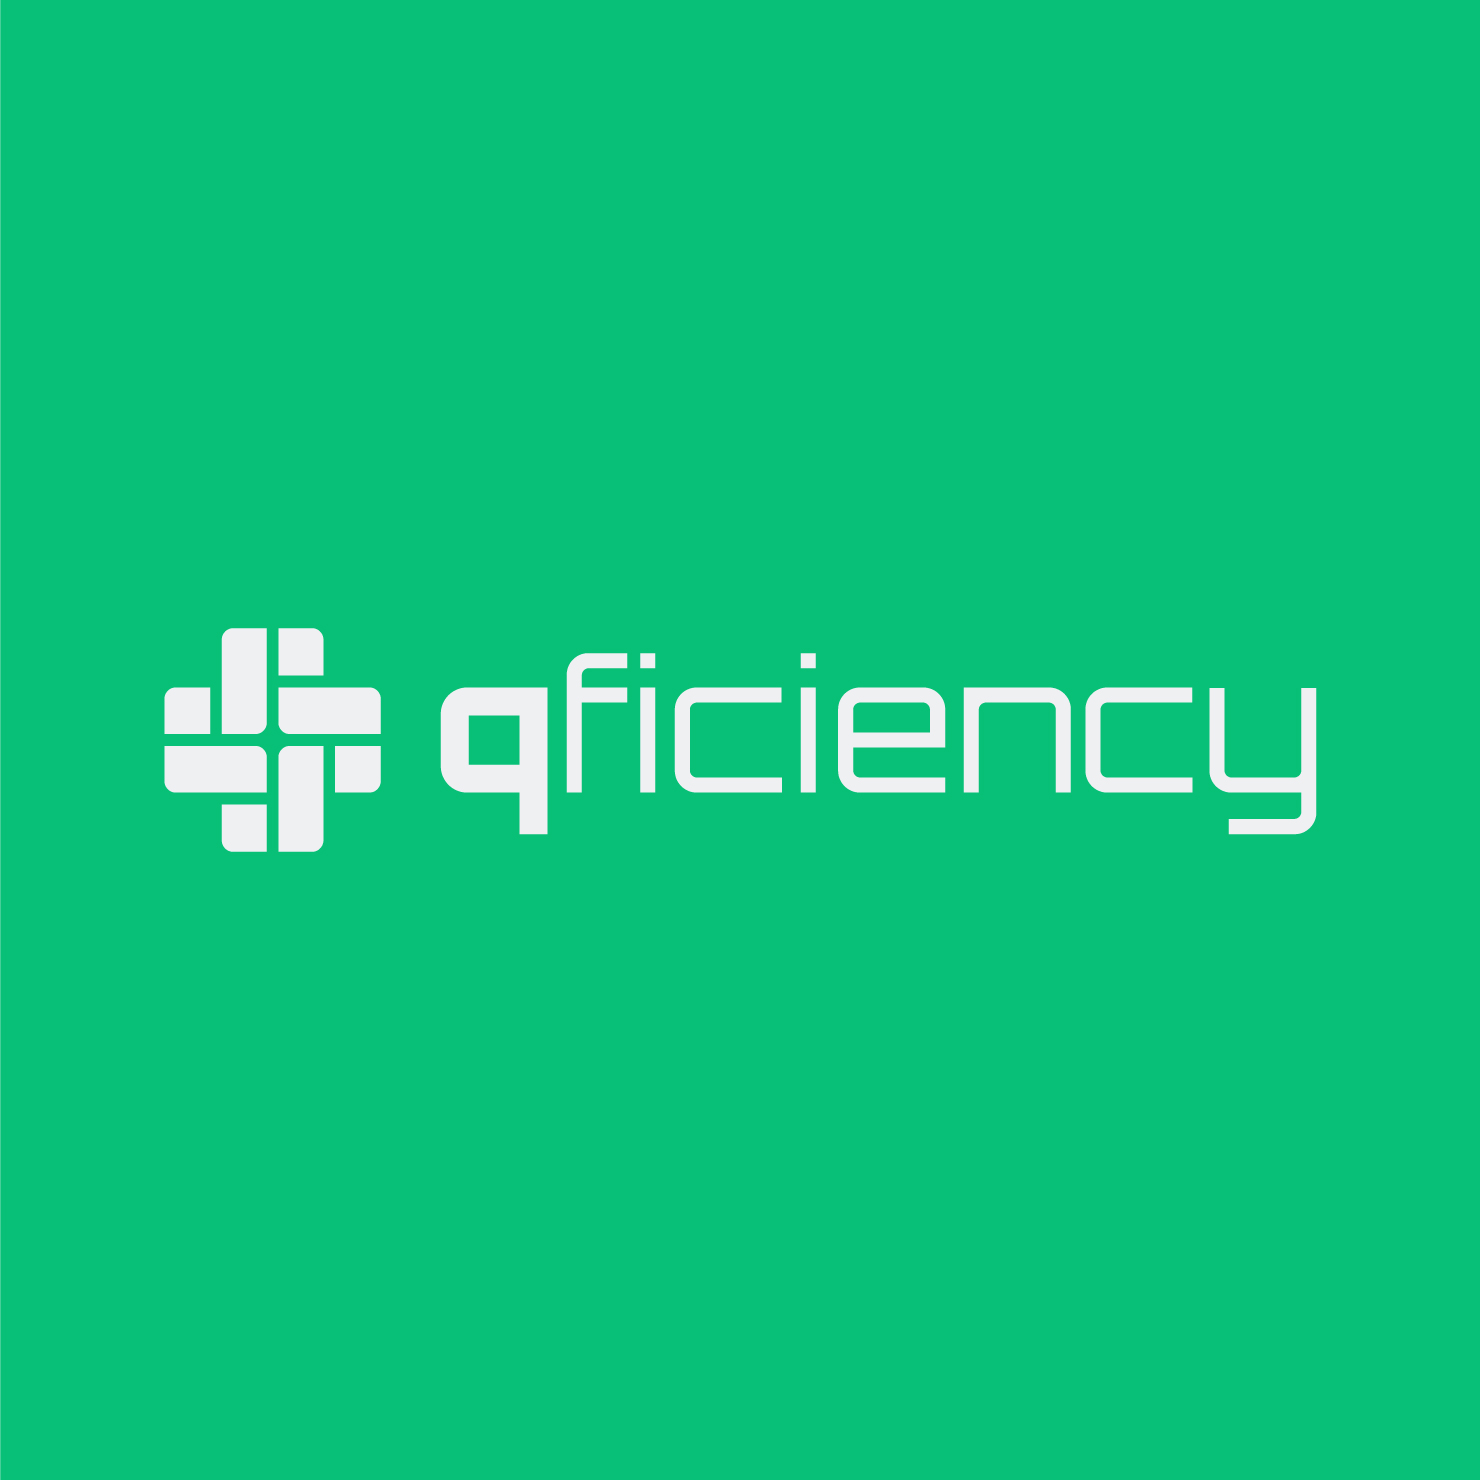 Qficiency logo on green background